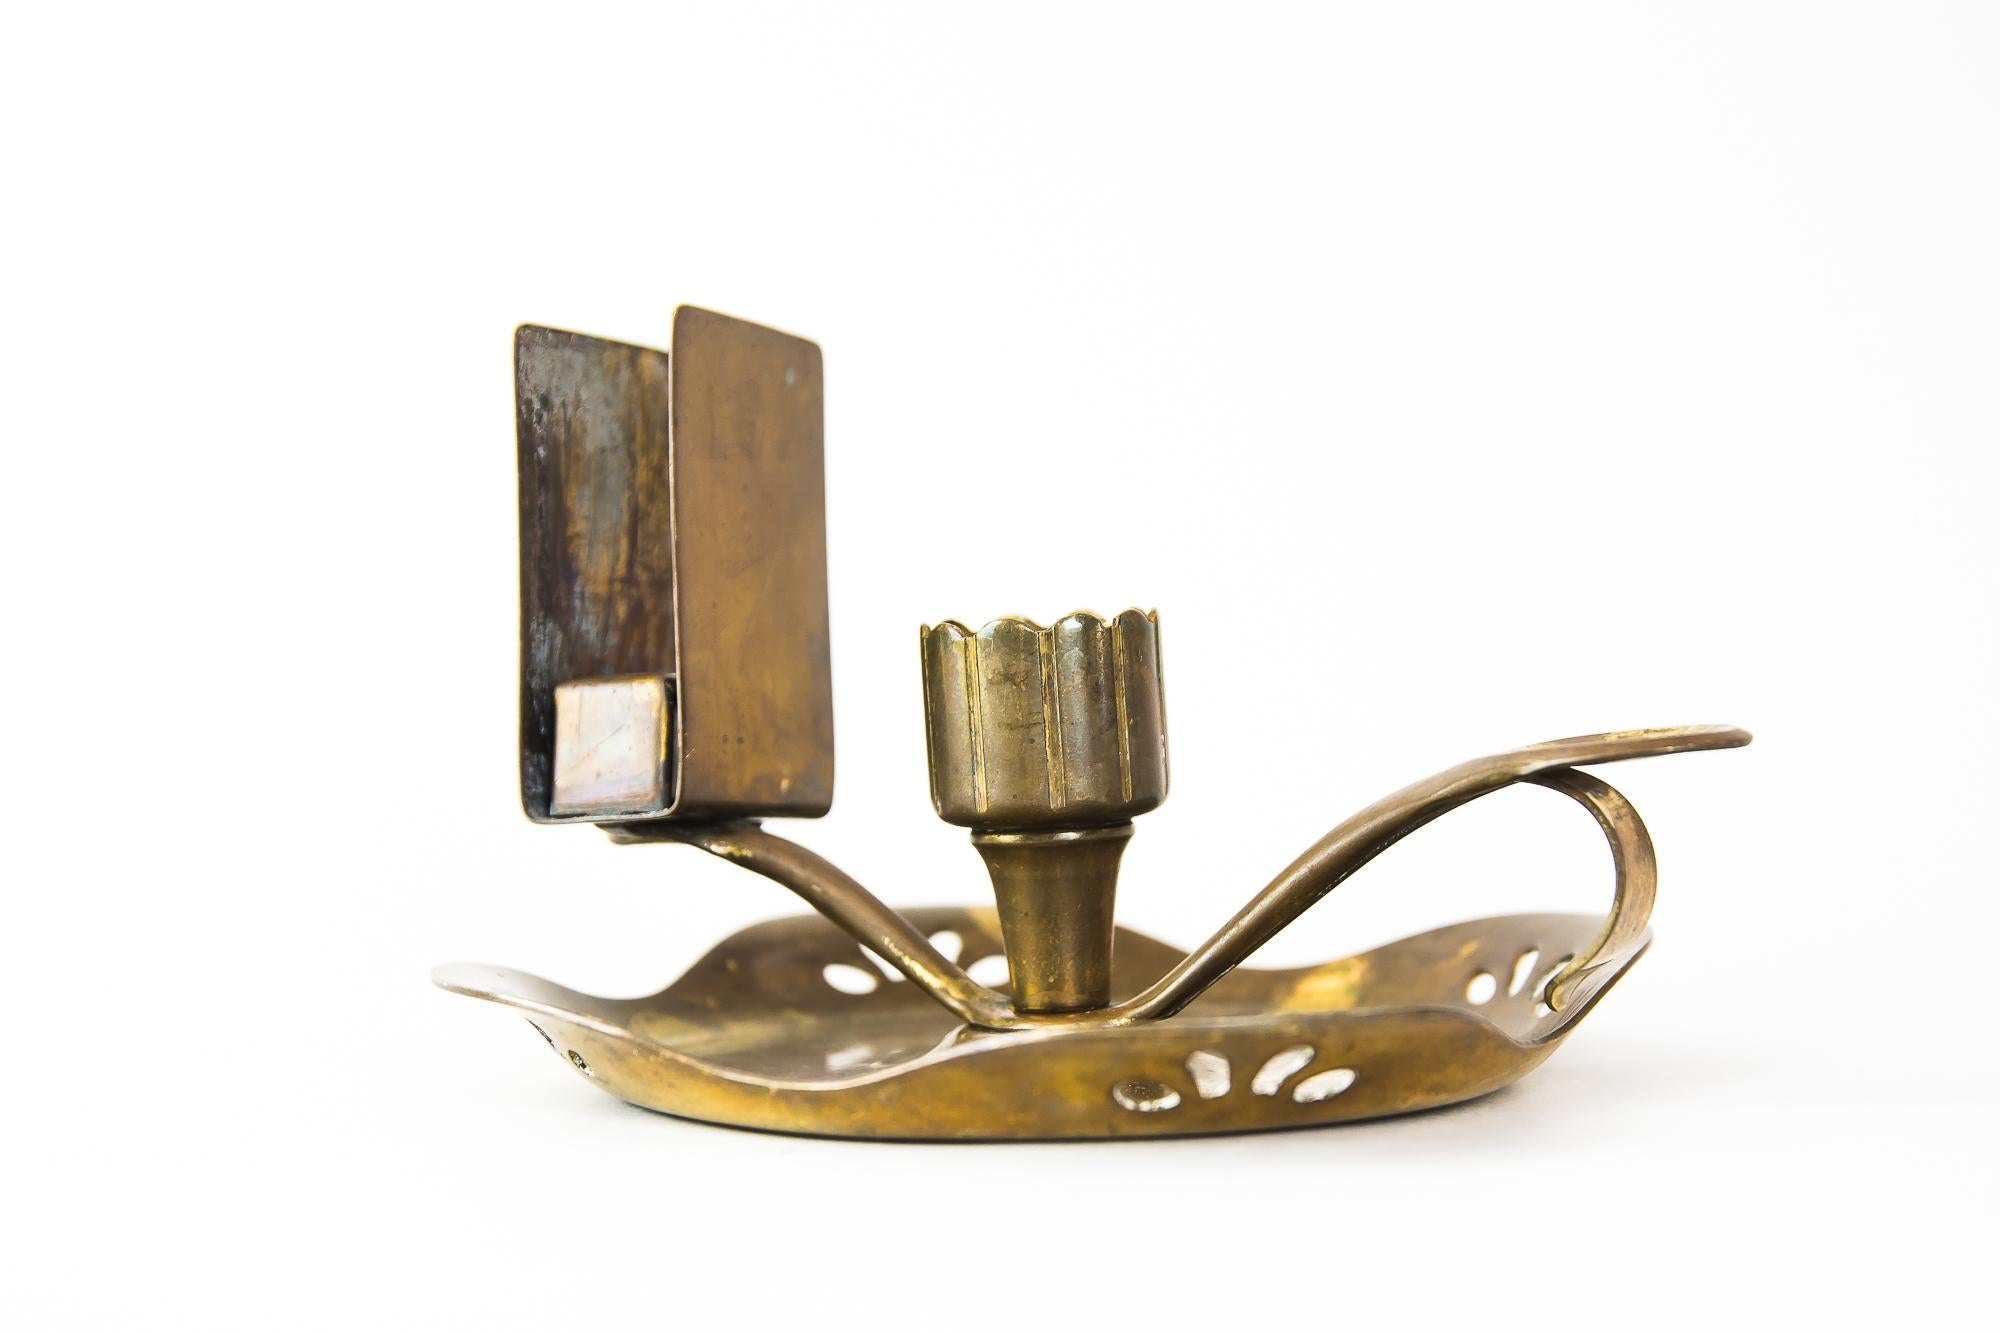 Art Deco candleholder with matchbox holder for wine cellars, Vienna, circa 1920s
Polished and stove enameled.